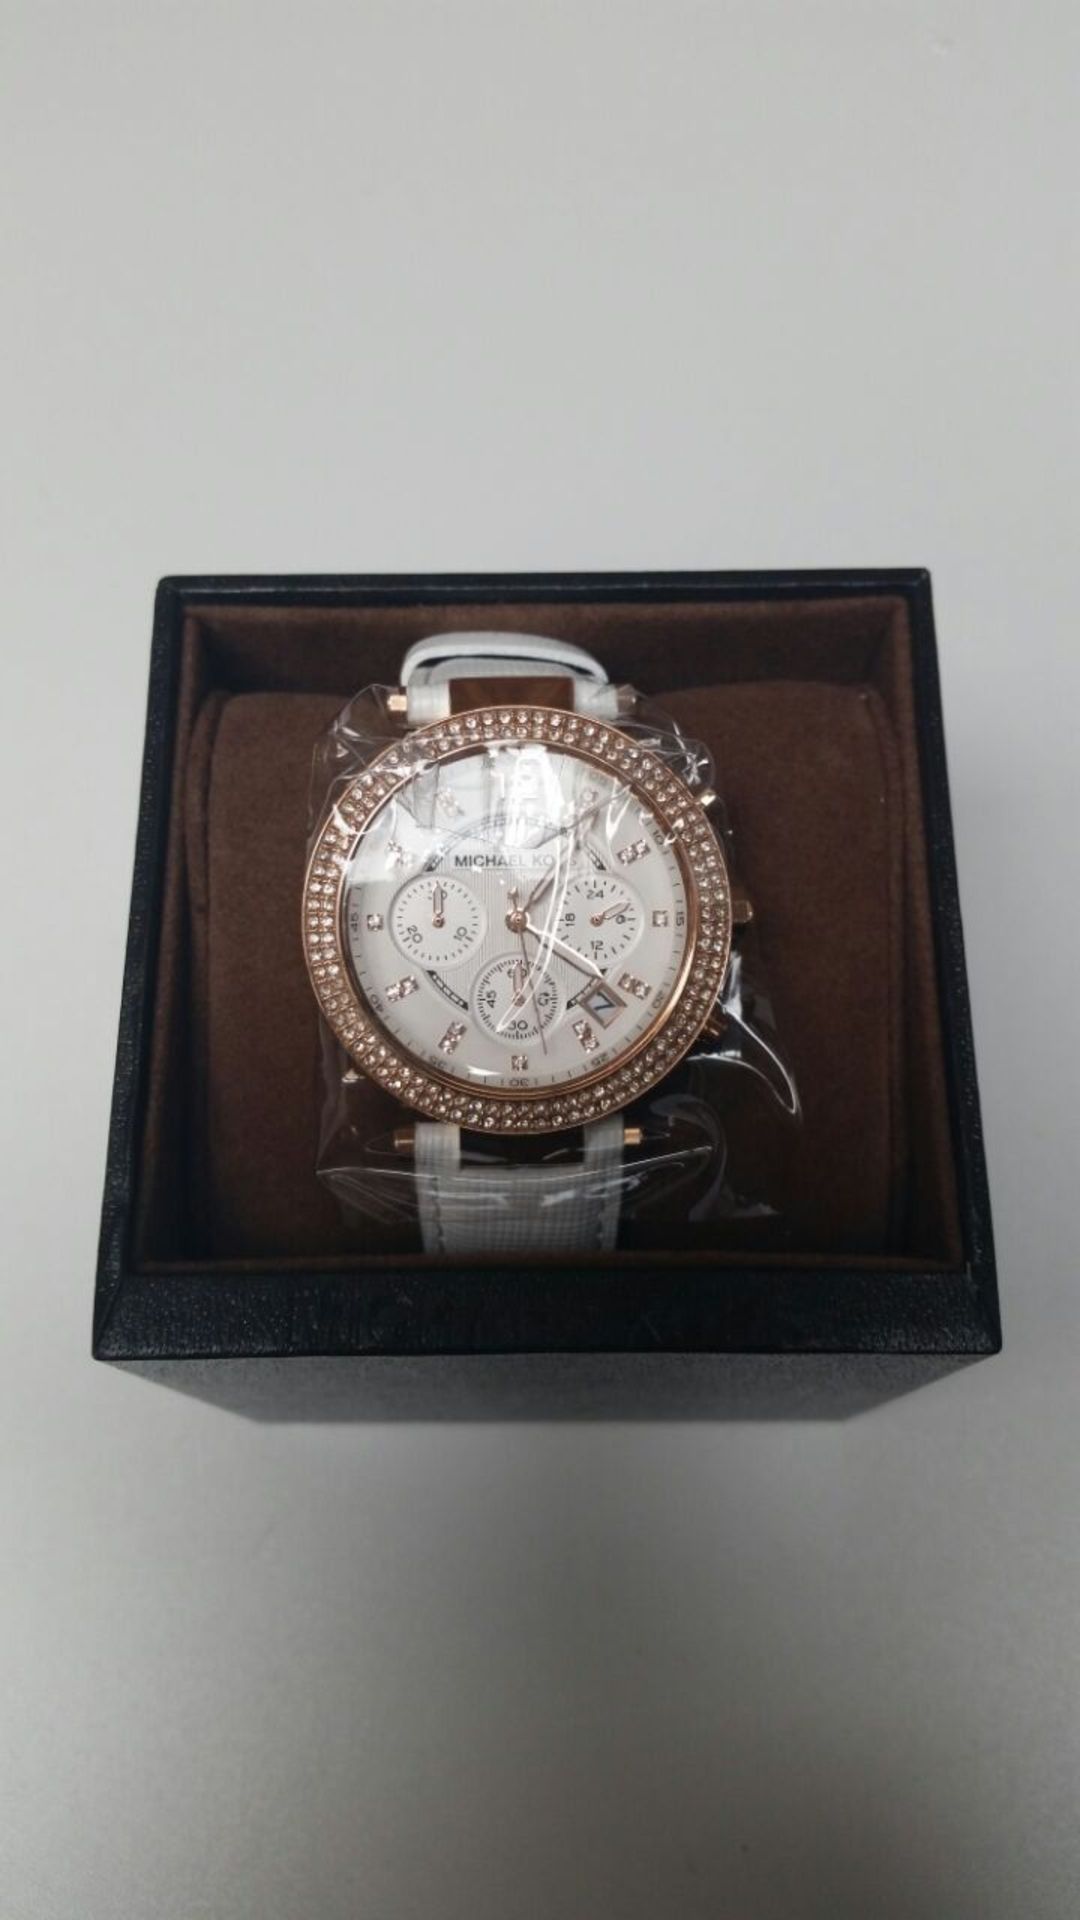 BRAND NEW MICHAEL KORS MK2281, LADIES ROSE GOLD COLOURED PARKER CHRONOGRAPH WATCH, WITH A WHITE